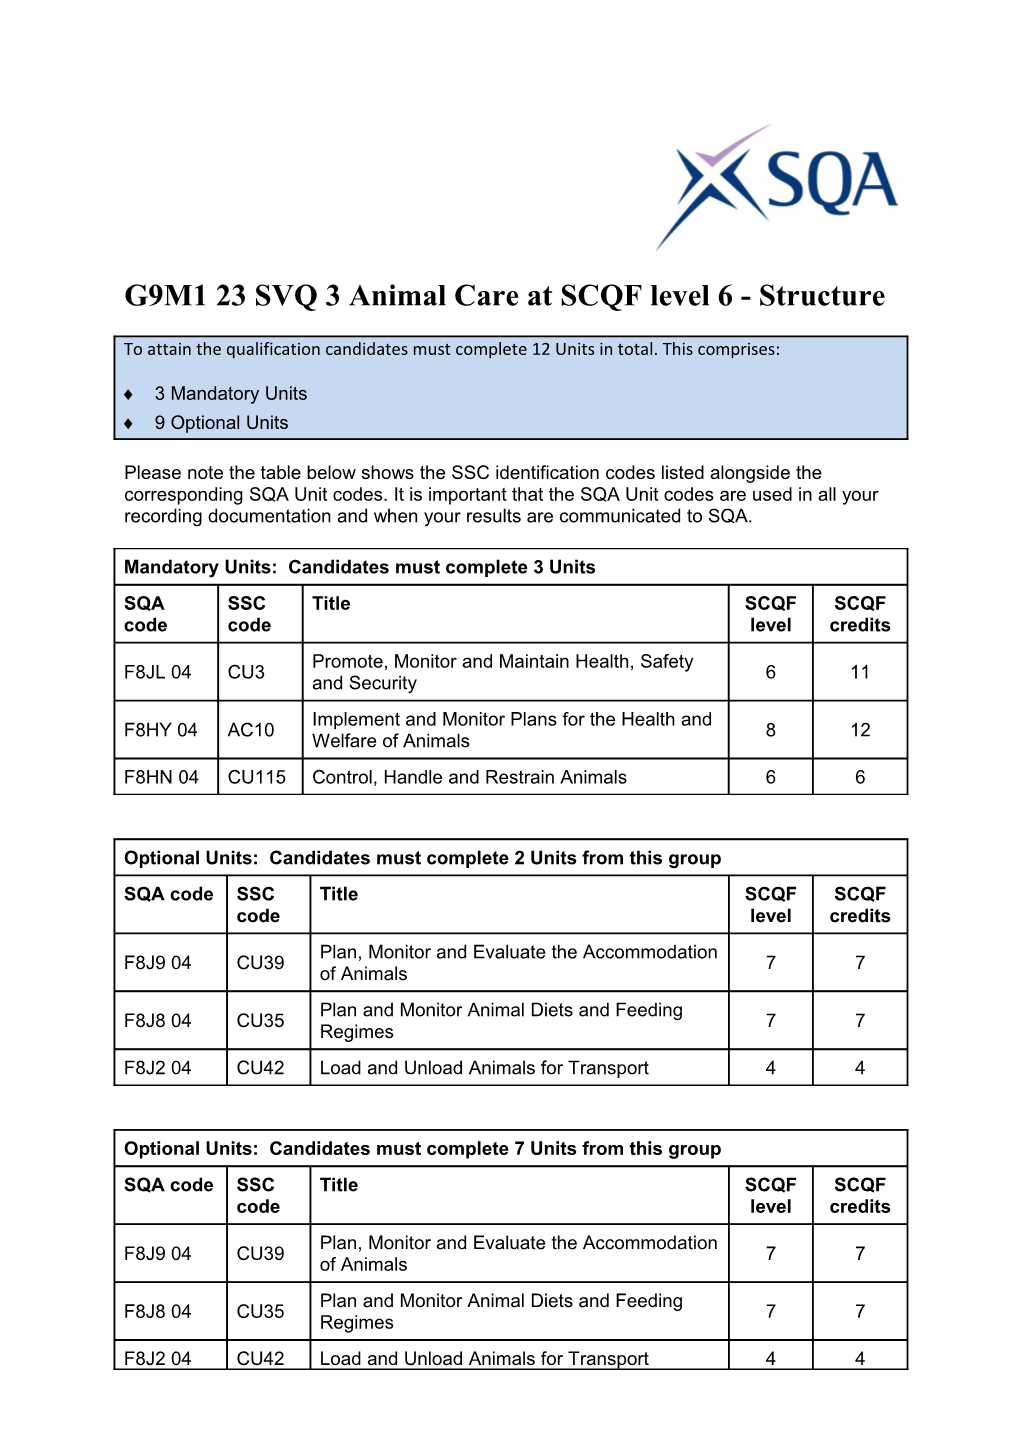 G9M1 23SVQ 3 Animal Care at SCQF Level 6 - Structure